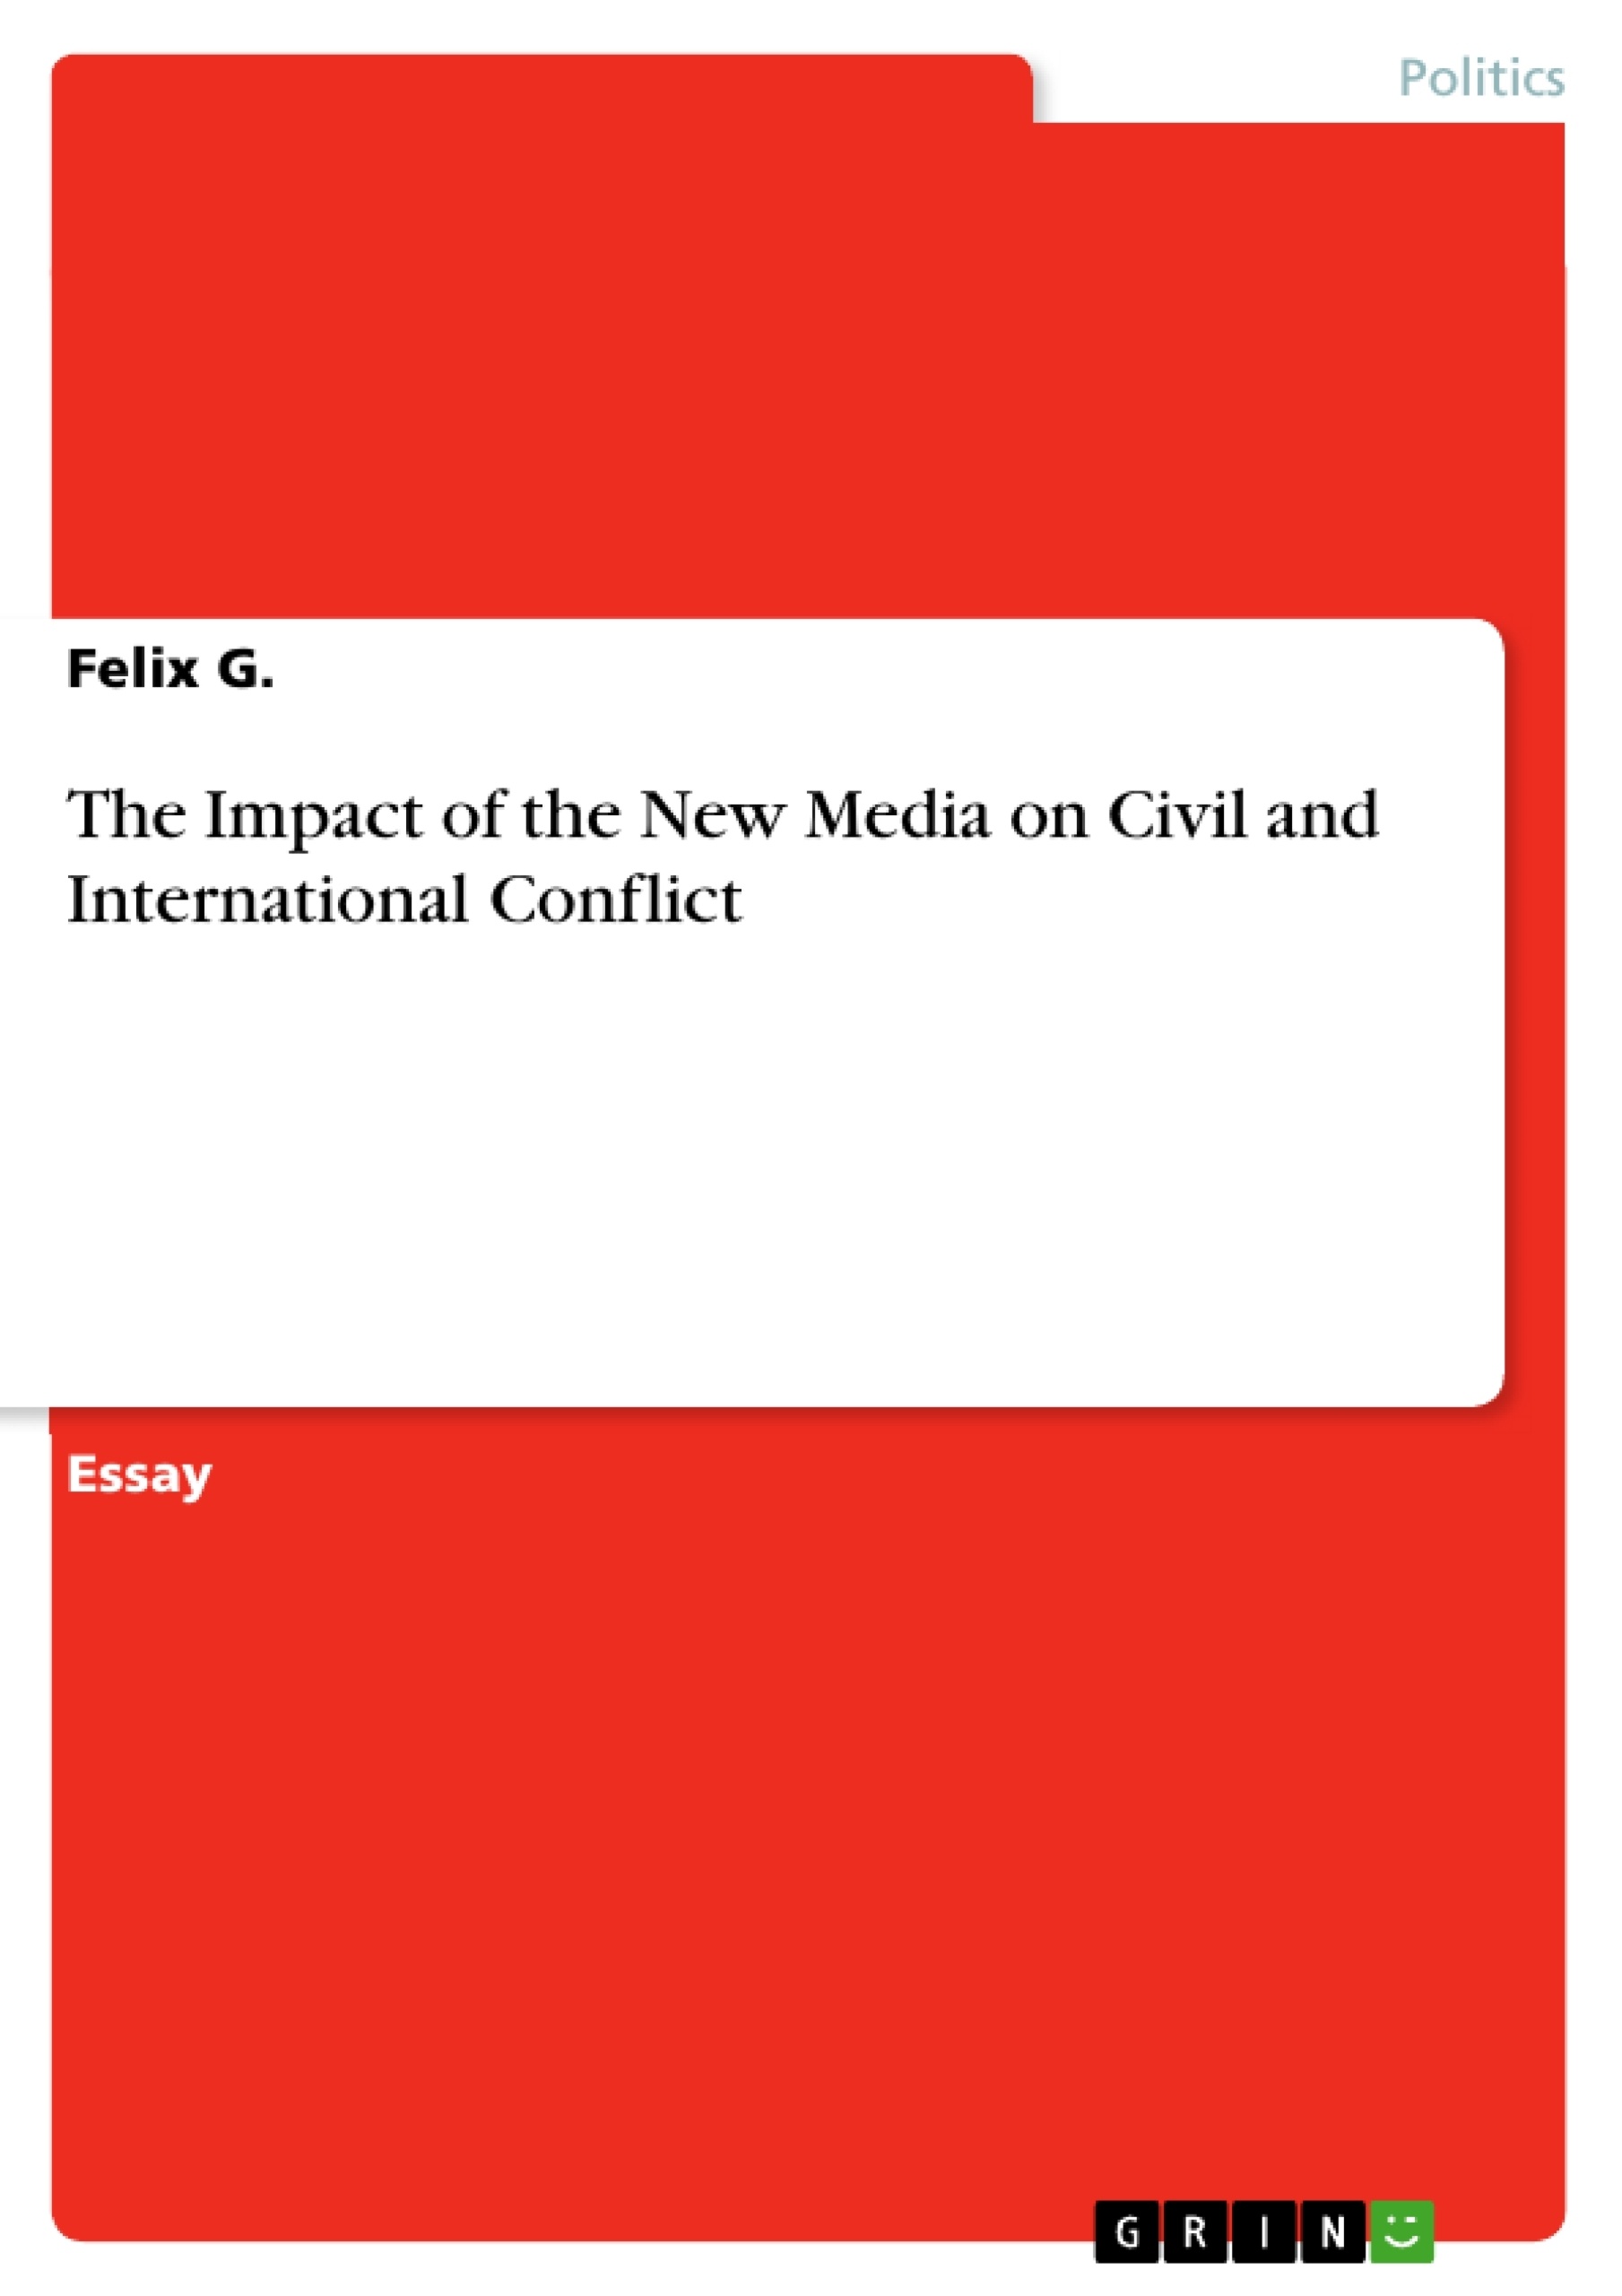 Titel: The Impact of the New Media on Civil and International Conflict